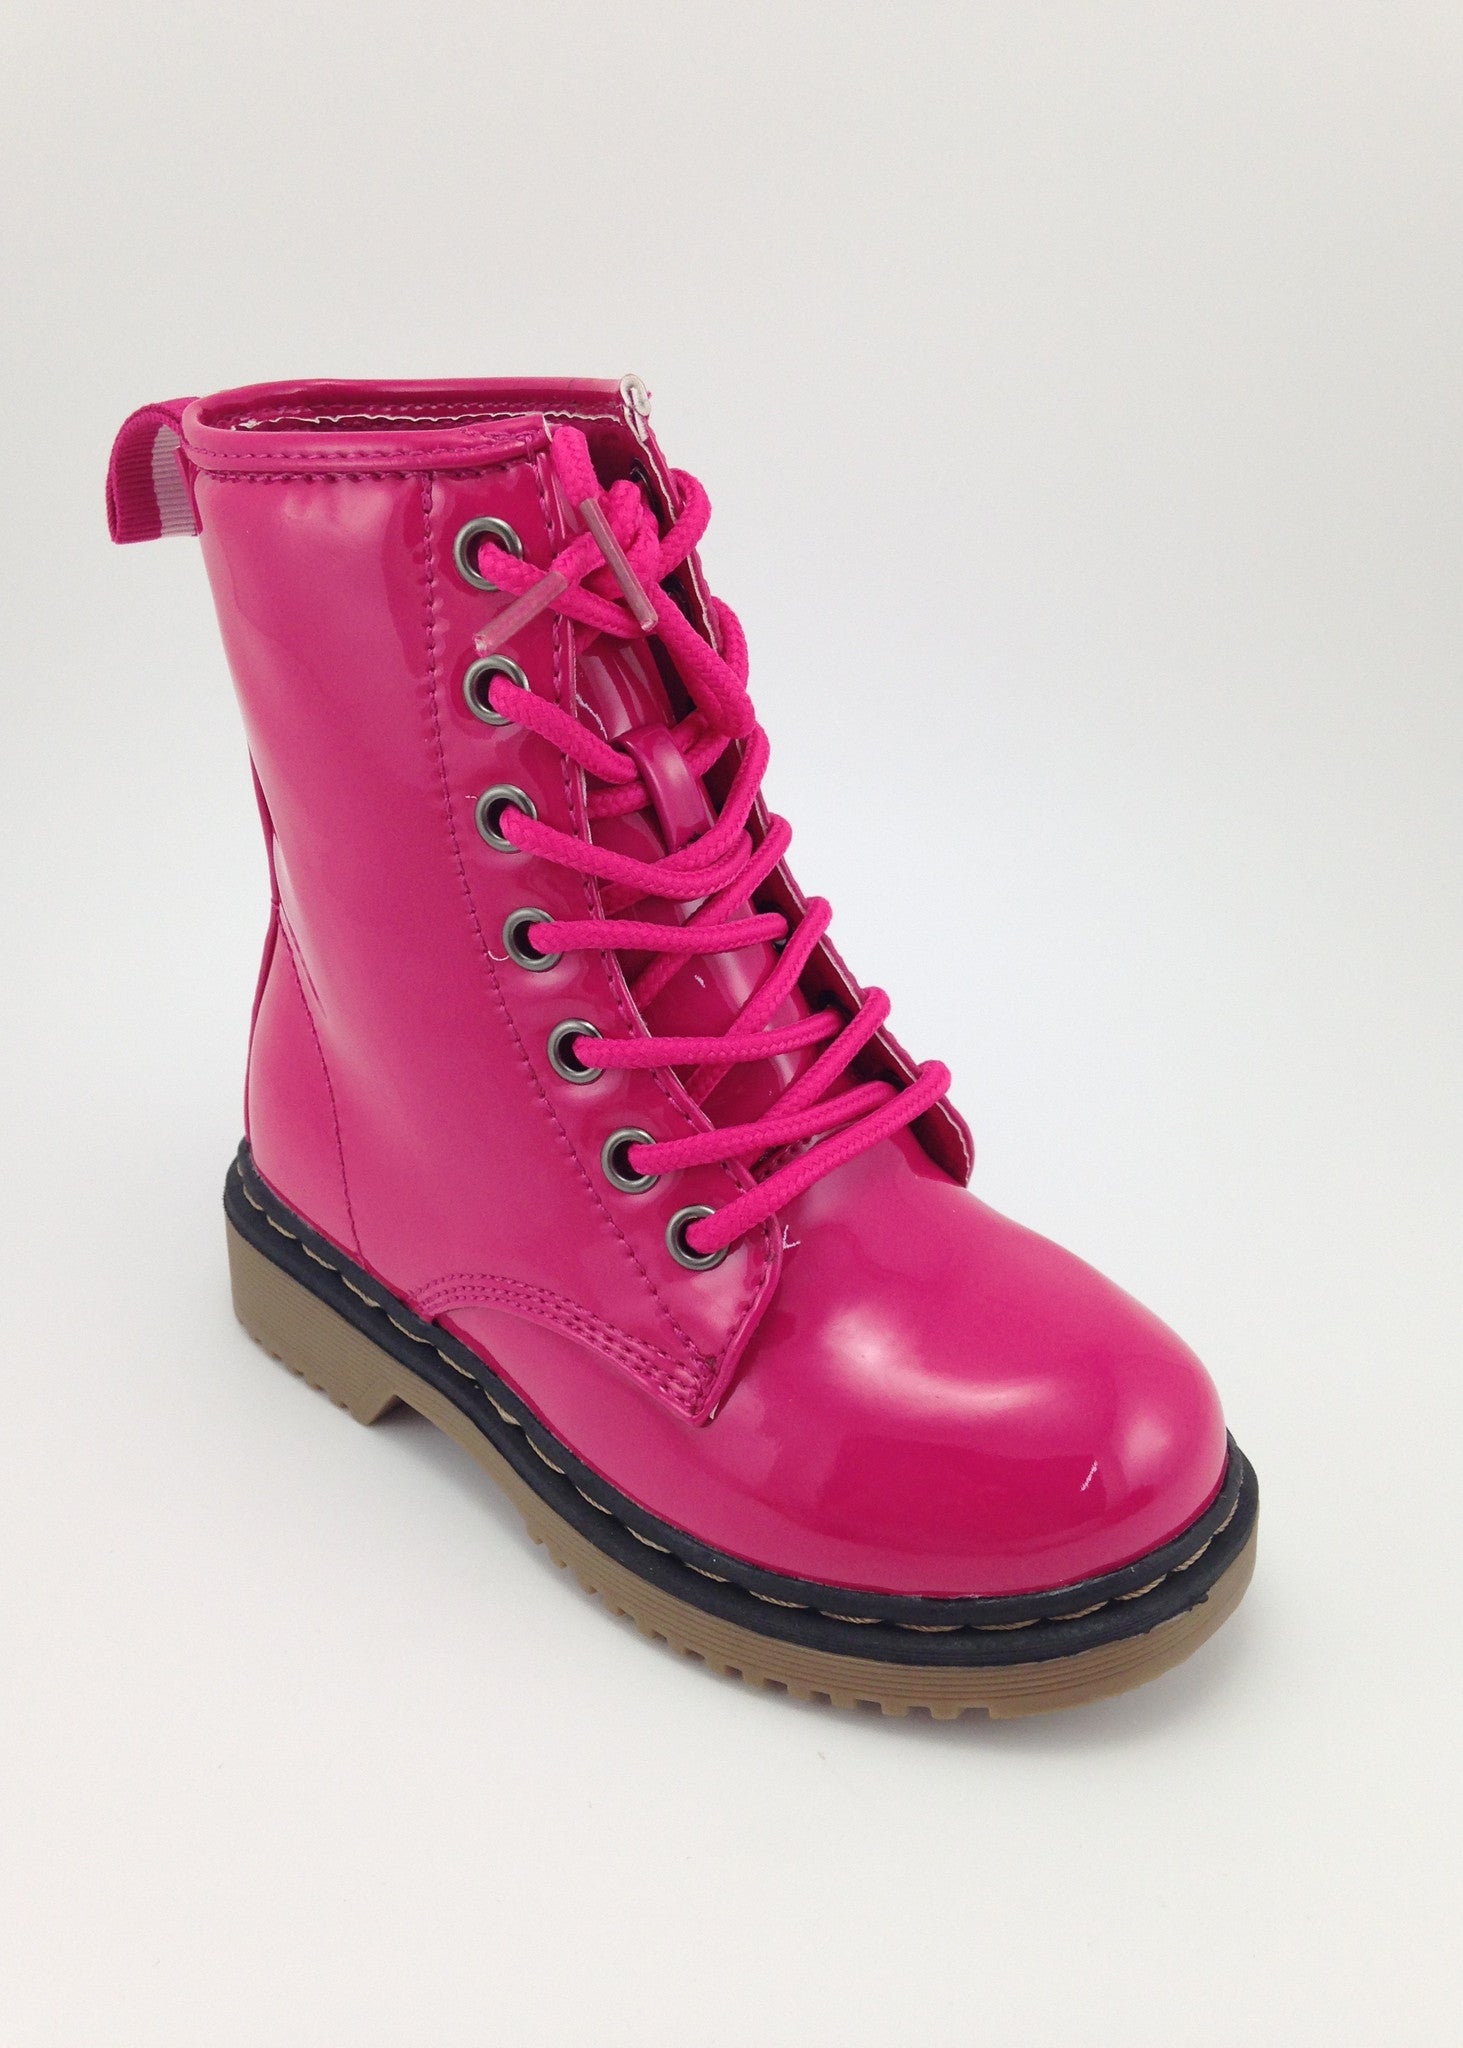 girls pink lace up boots